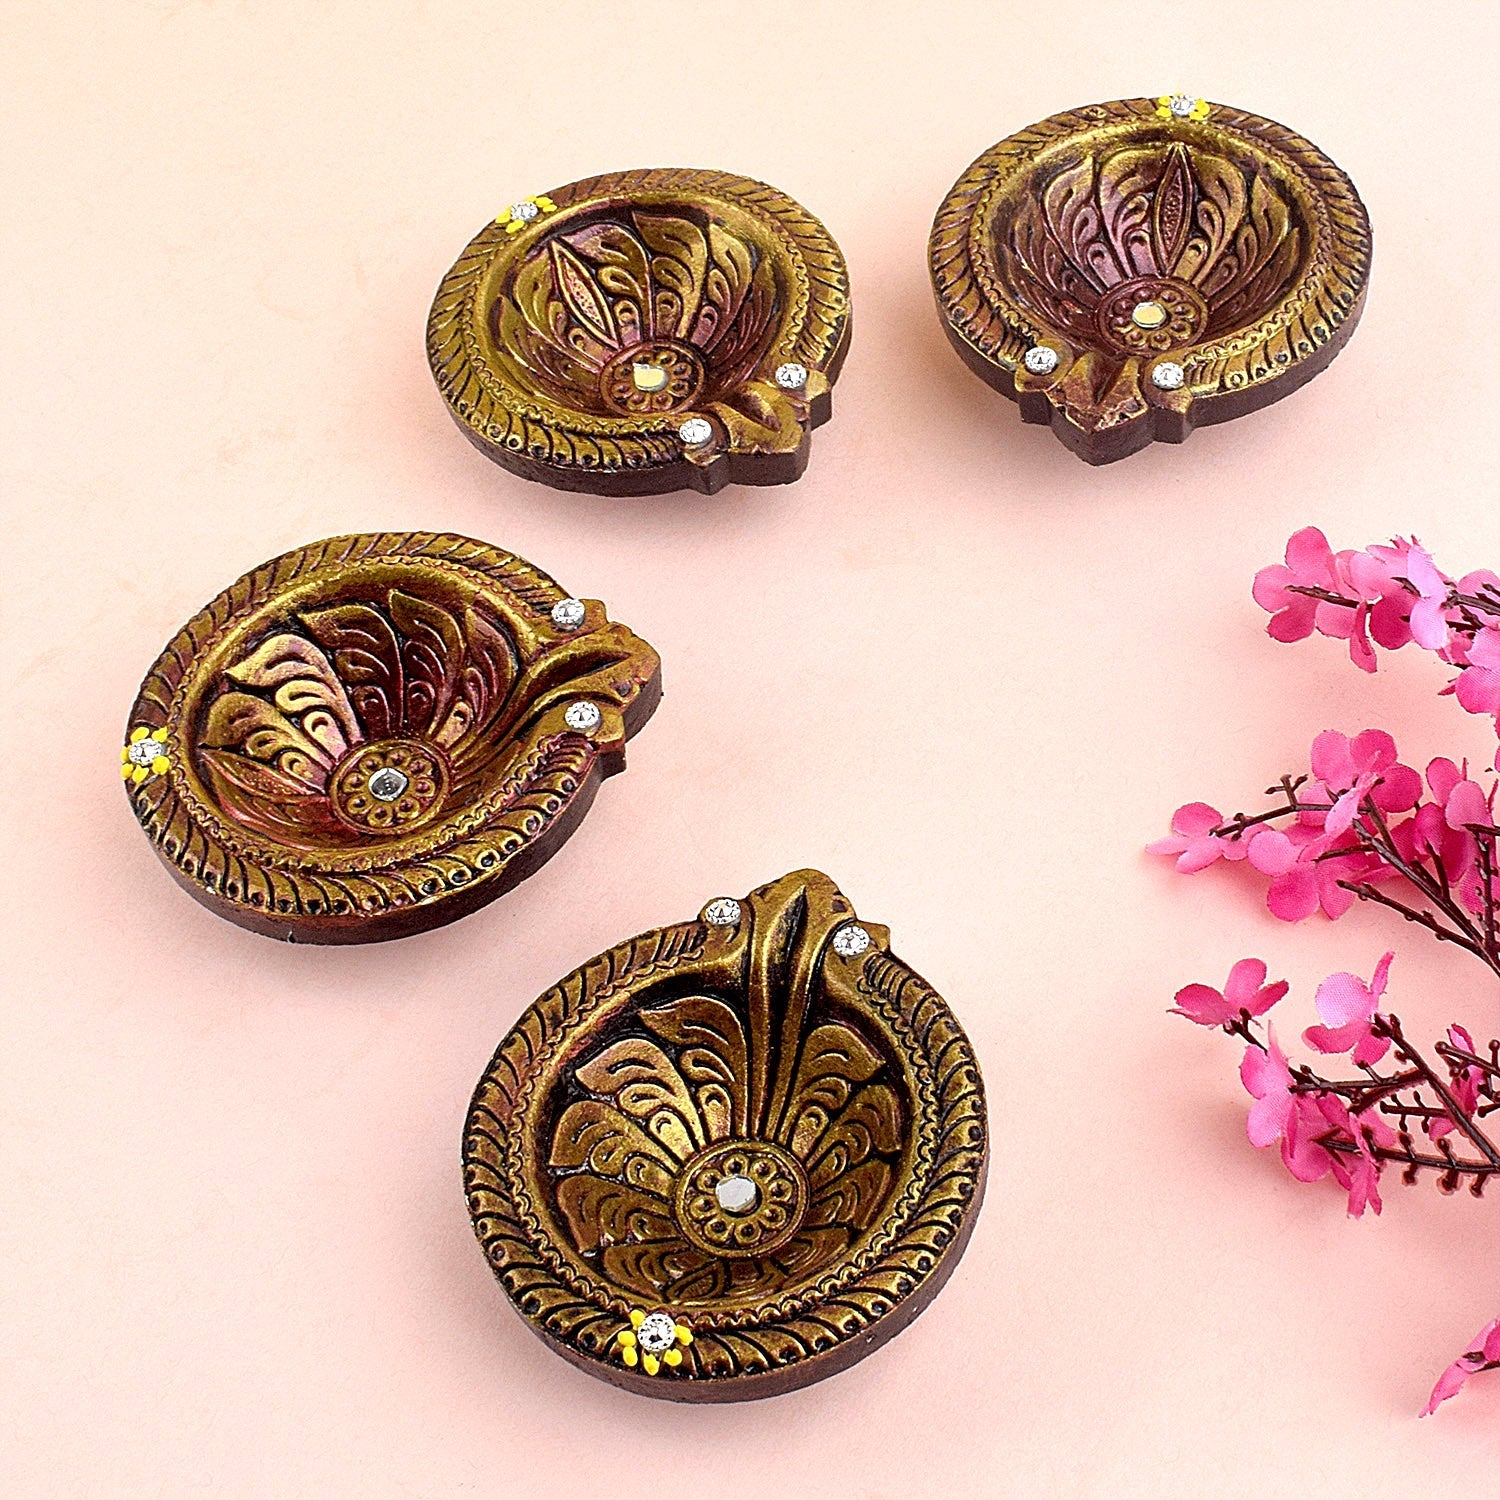 Oxidized Metallic Paint Clay Diyas Shining in Tradition